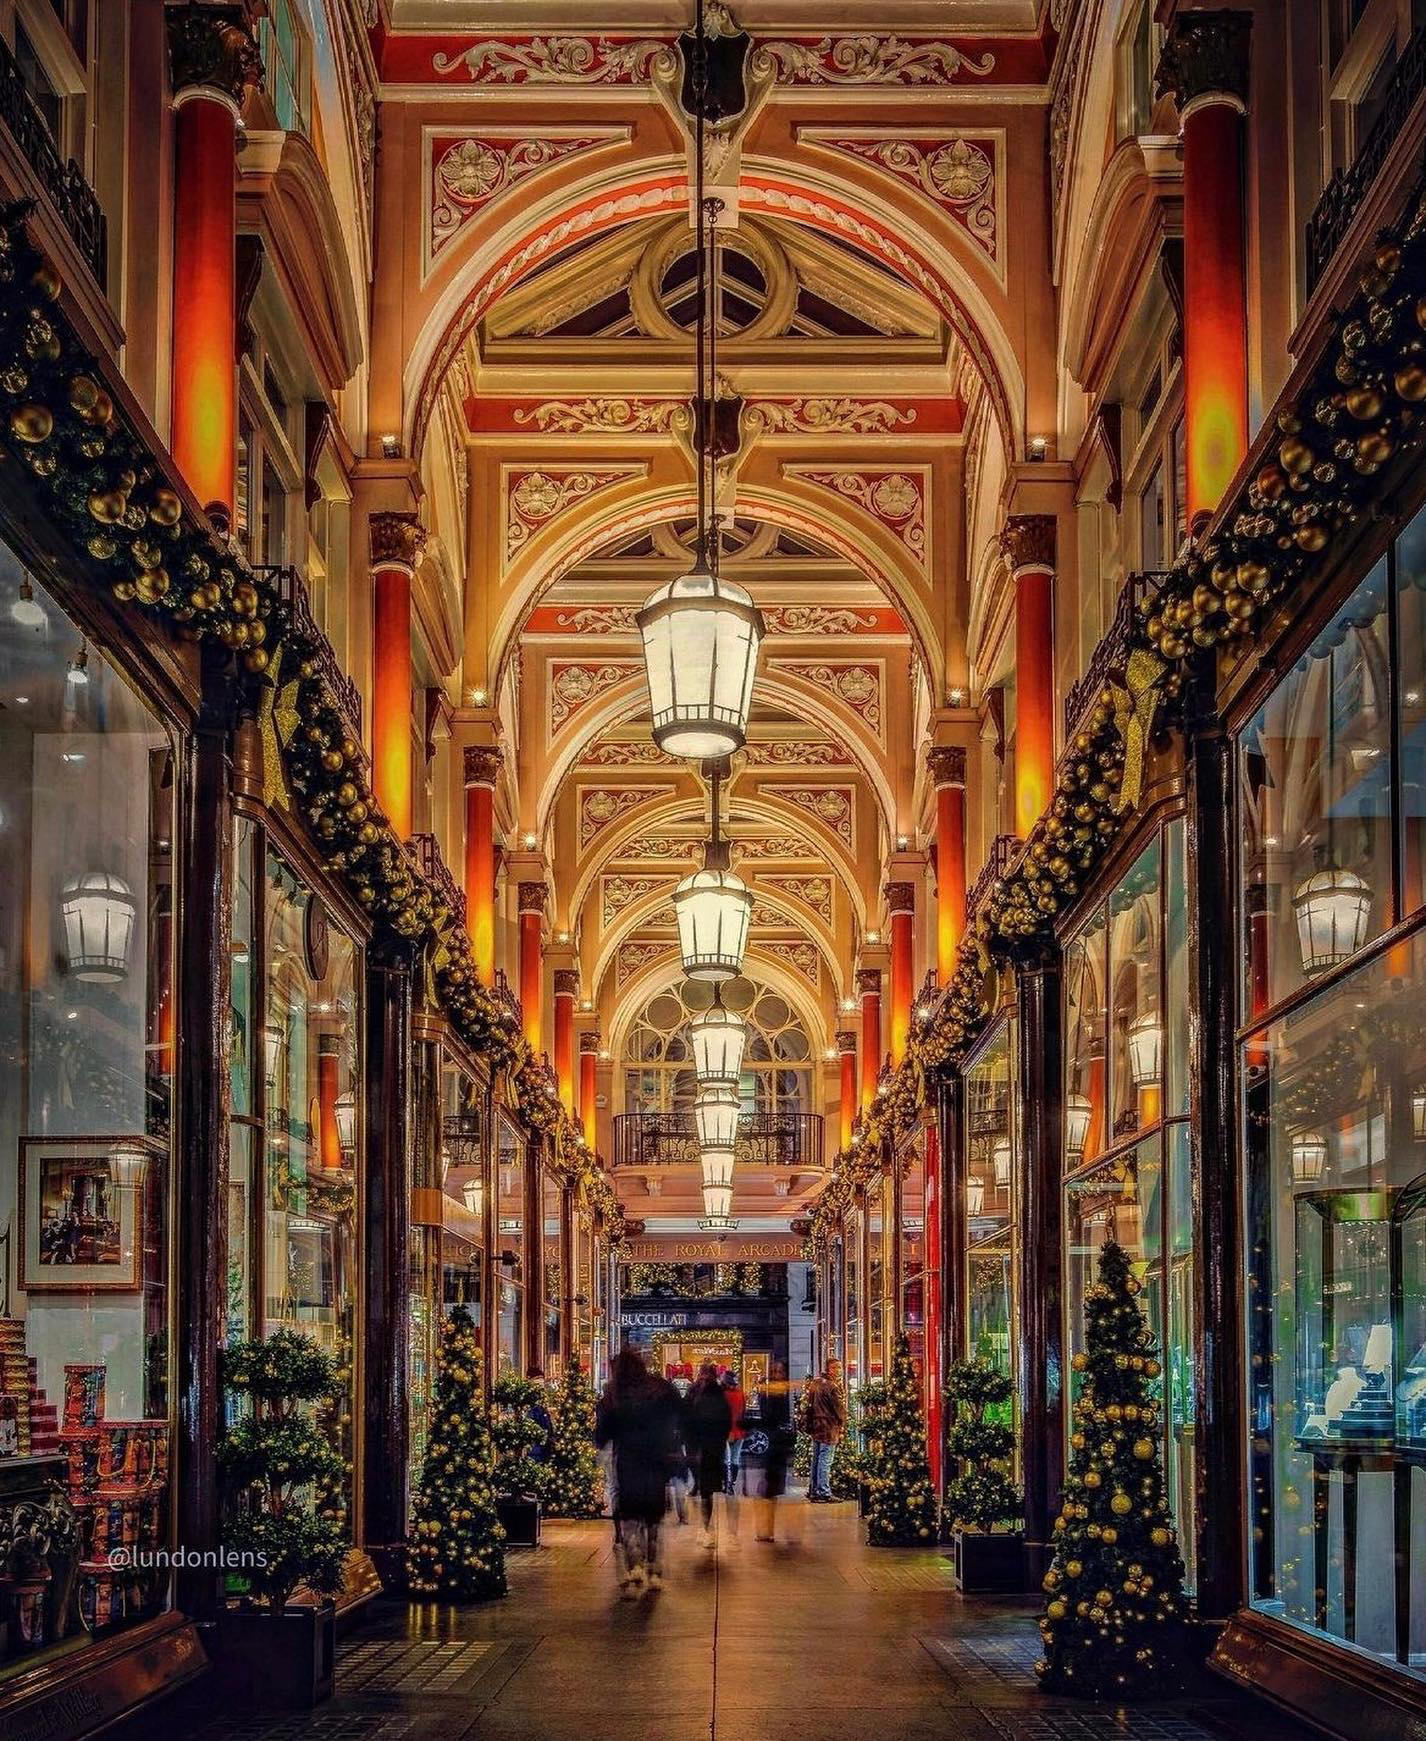 image  1 All Things England - It's beginning to look a lot like Christmas, especially in The Royal Arcade